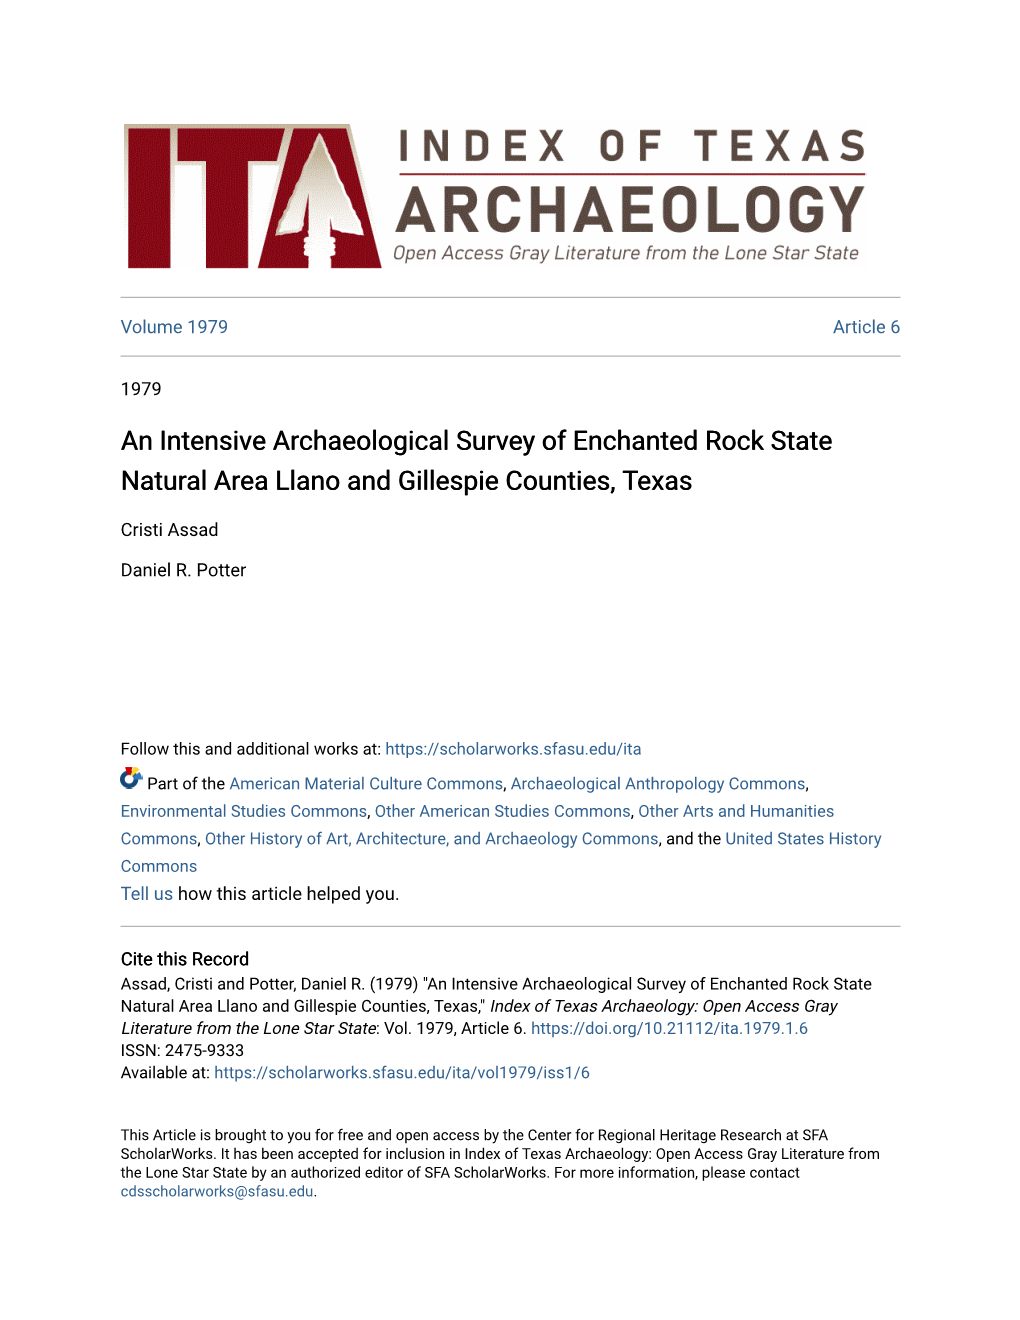 An Intensive Archaeological Survey of Enchanted Rock State Natural Area Llano and Gillespie Counties, Texas